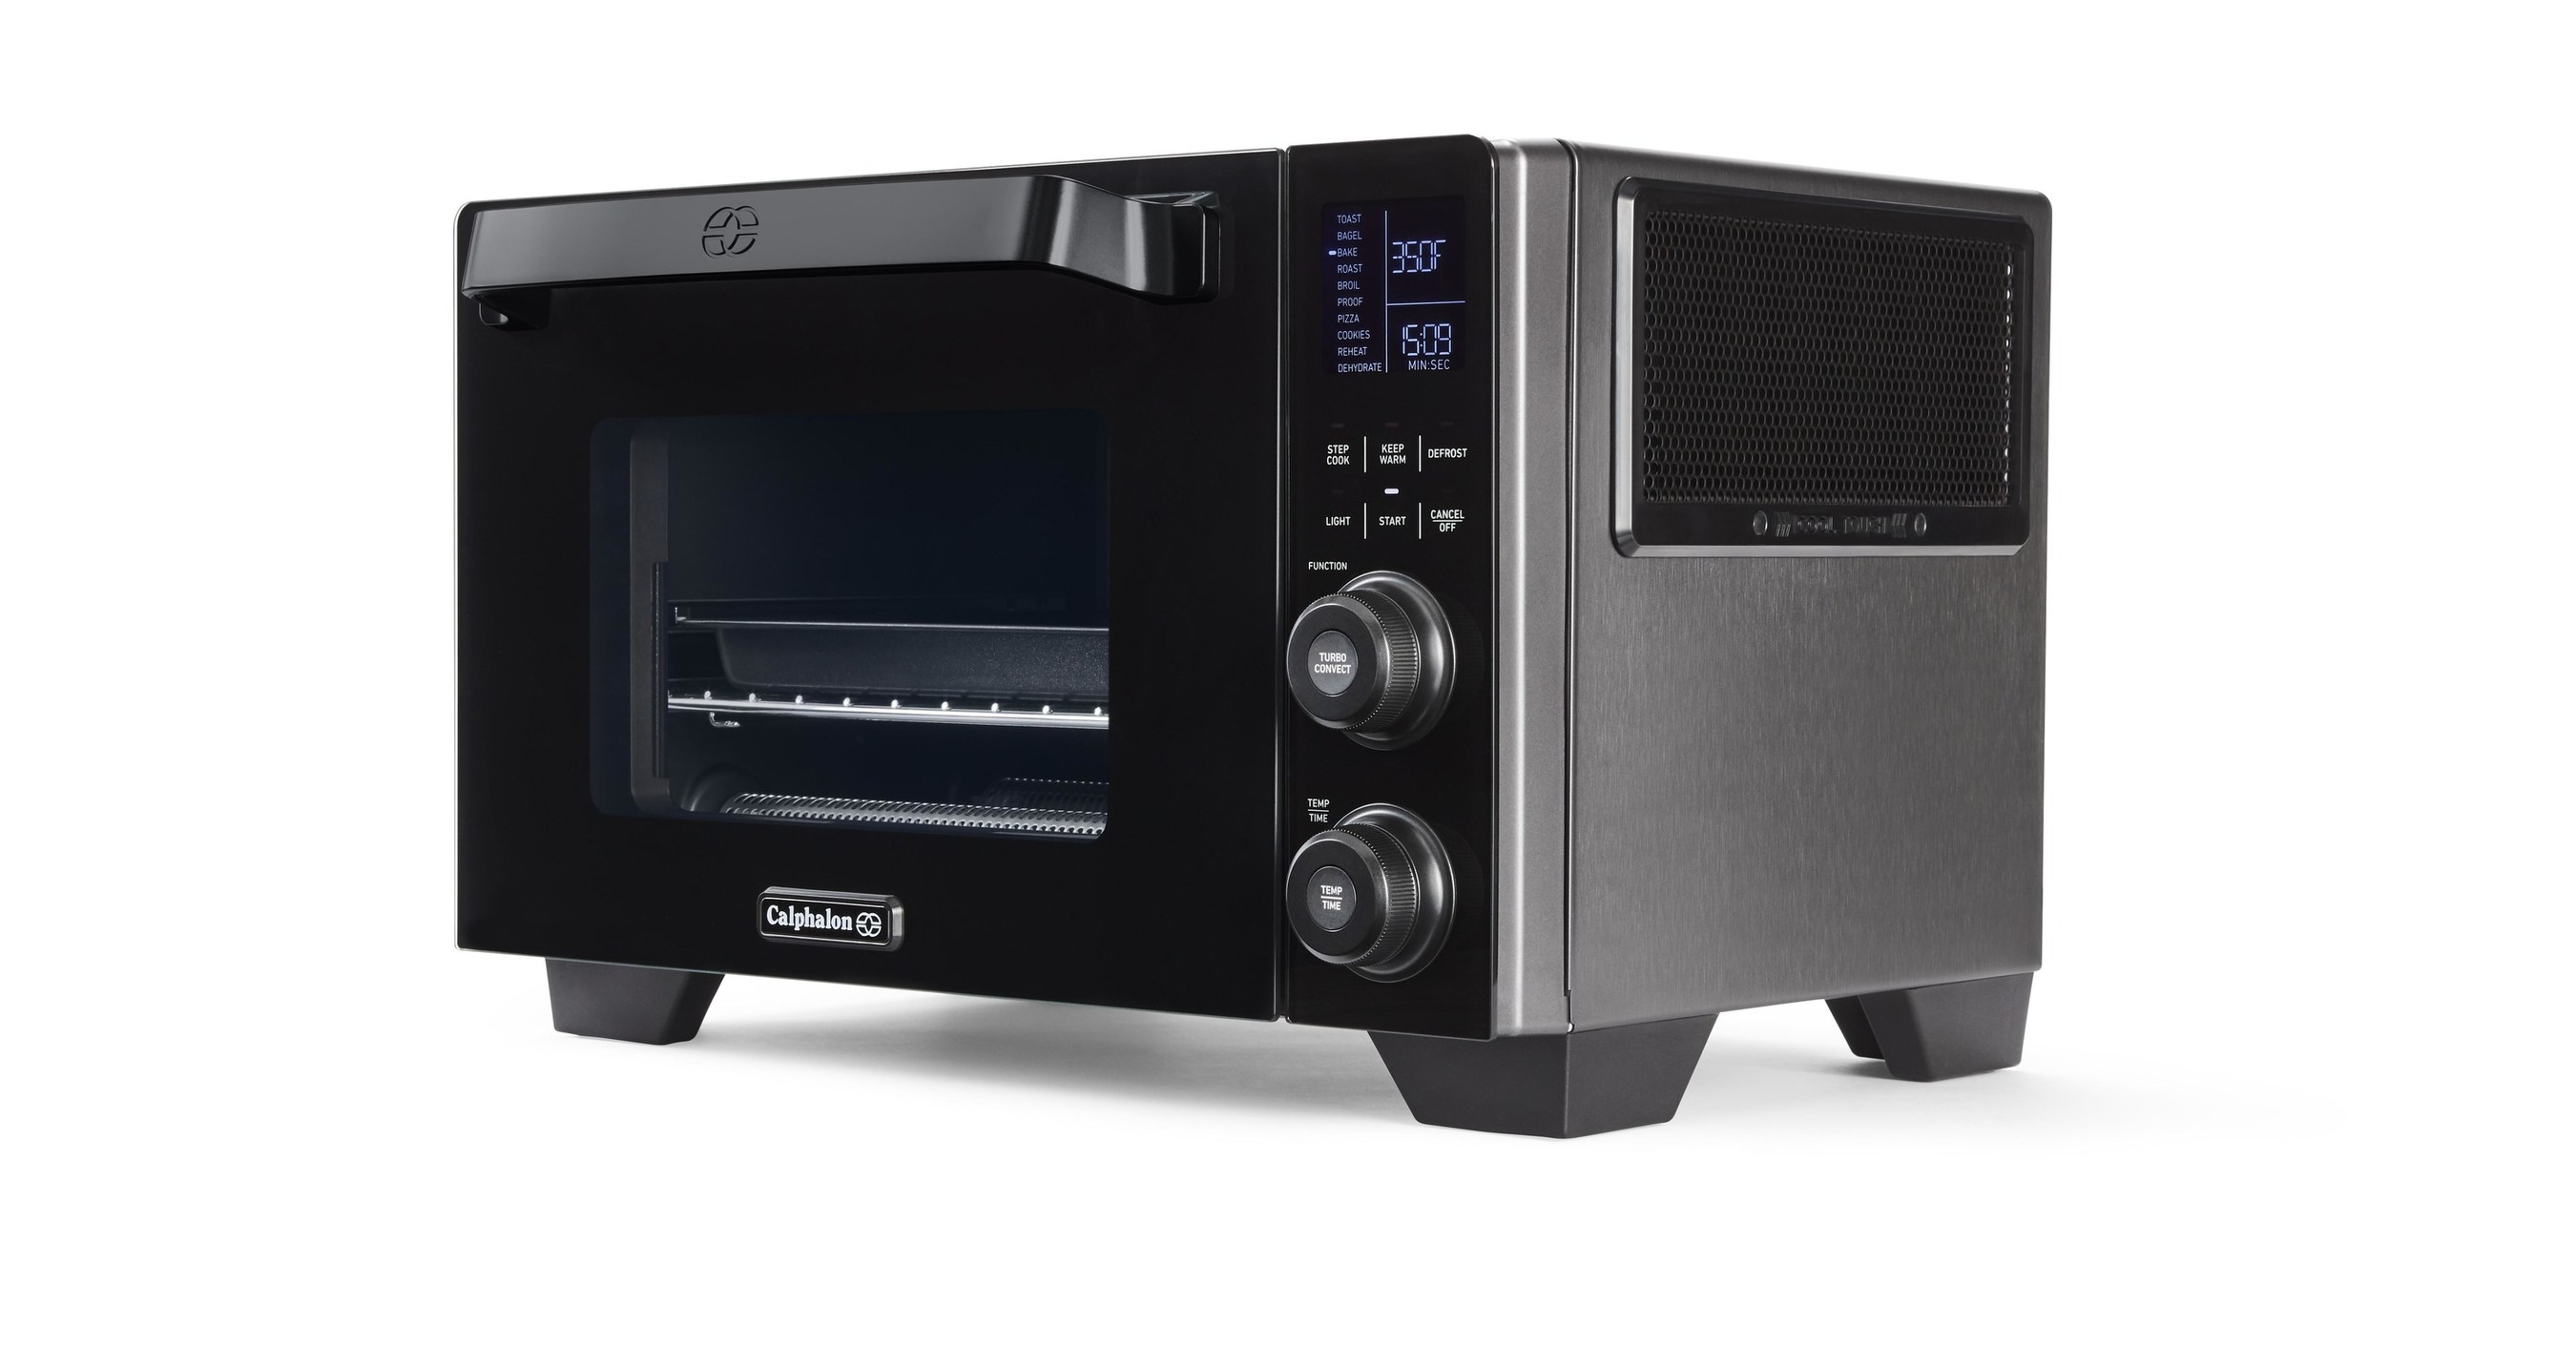 Calphalon Performance Cool Touch Toaster Oven review